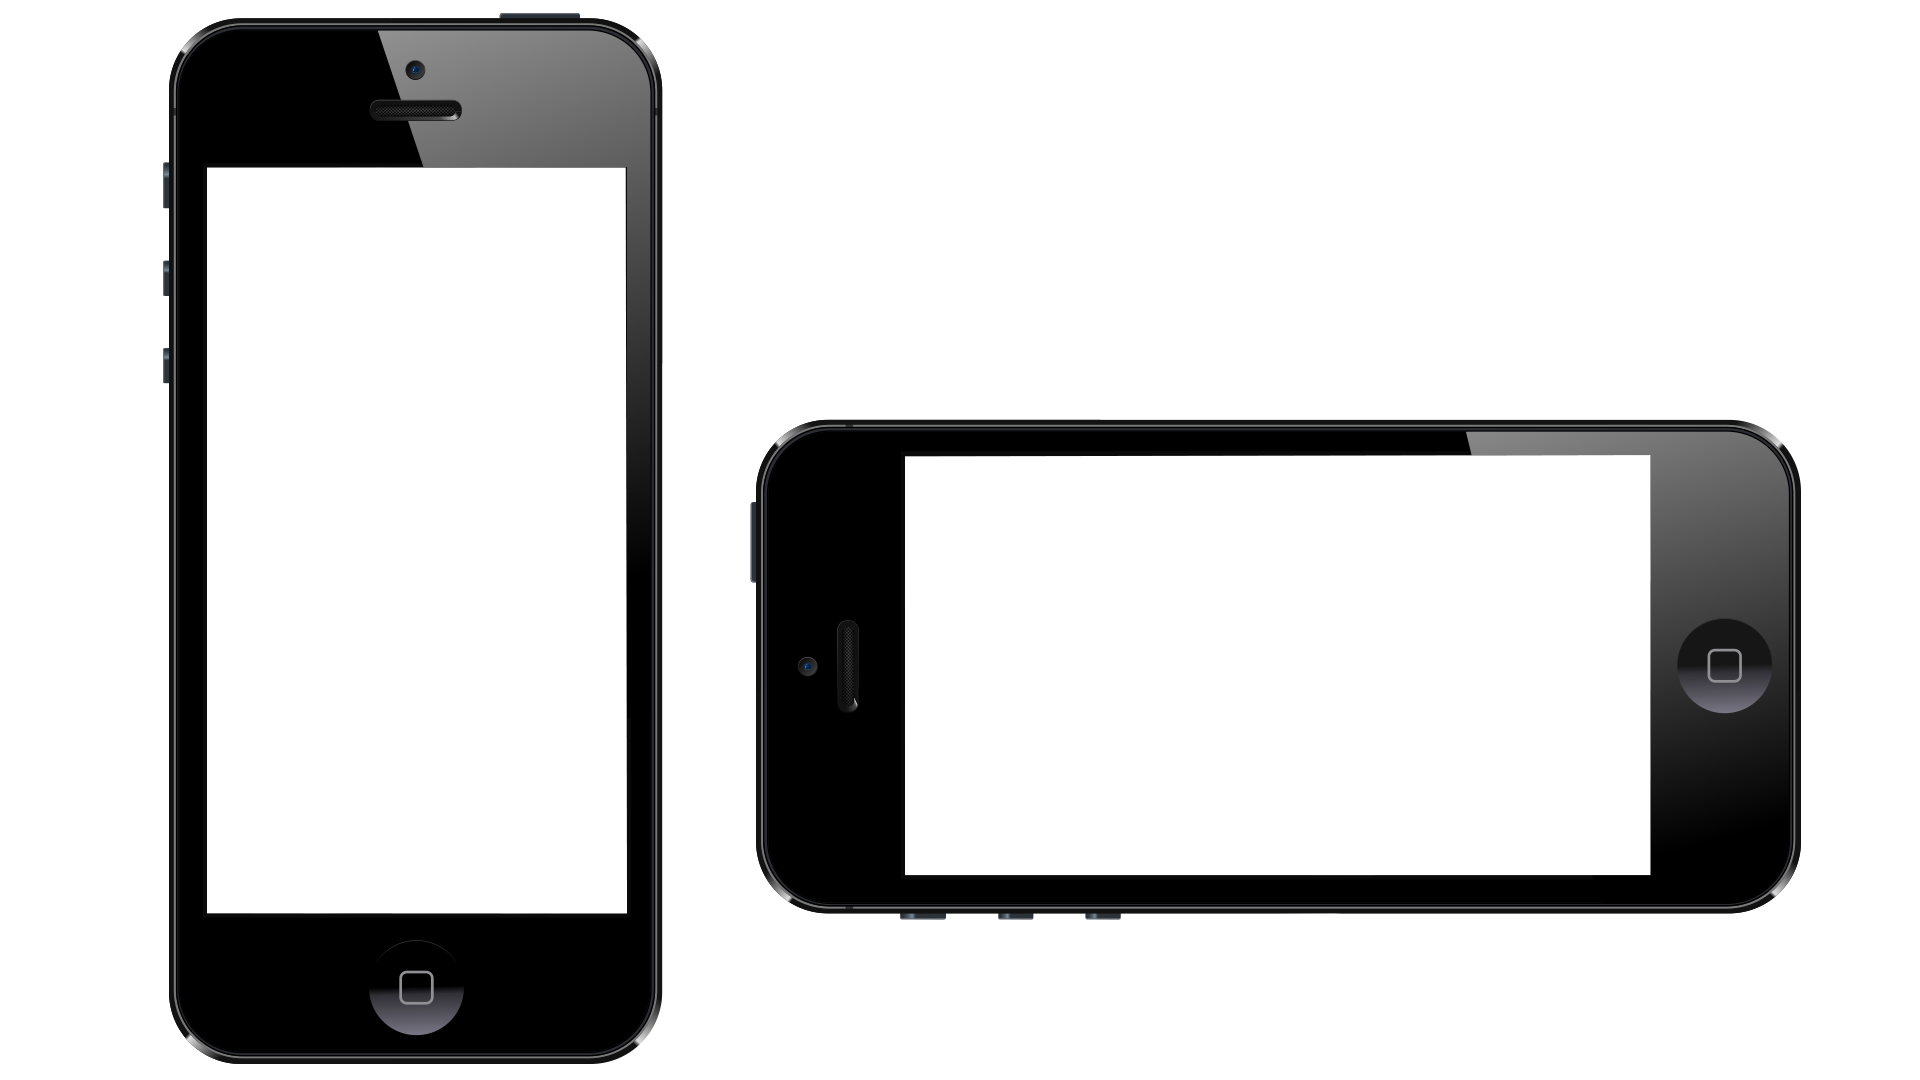 Two Iphones With Knockout Screens - Presentation (1920x1080)